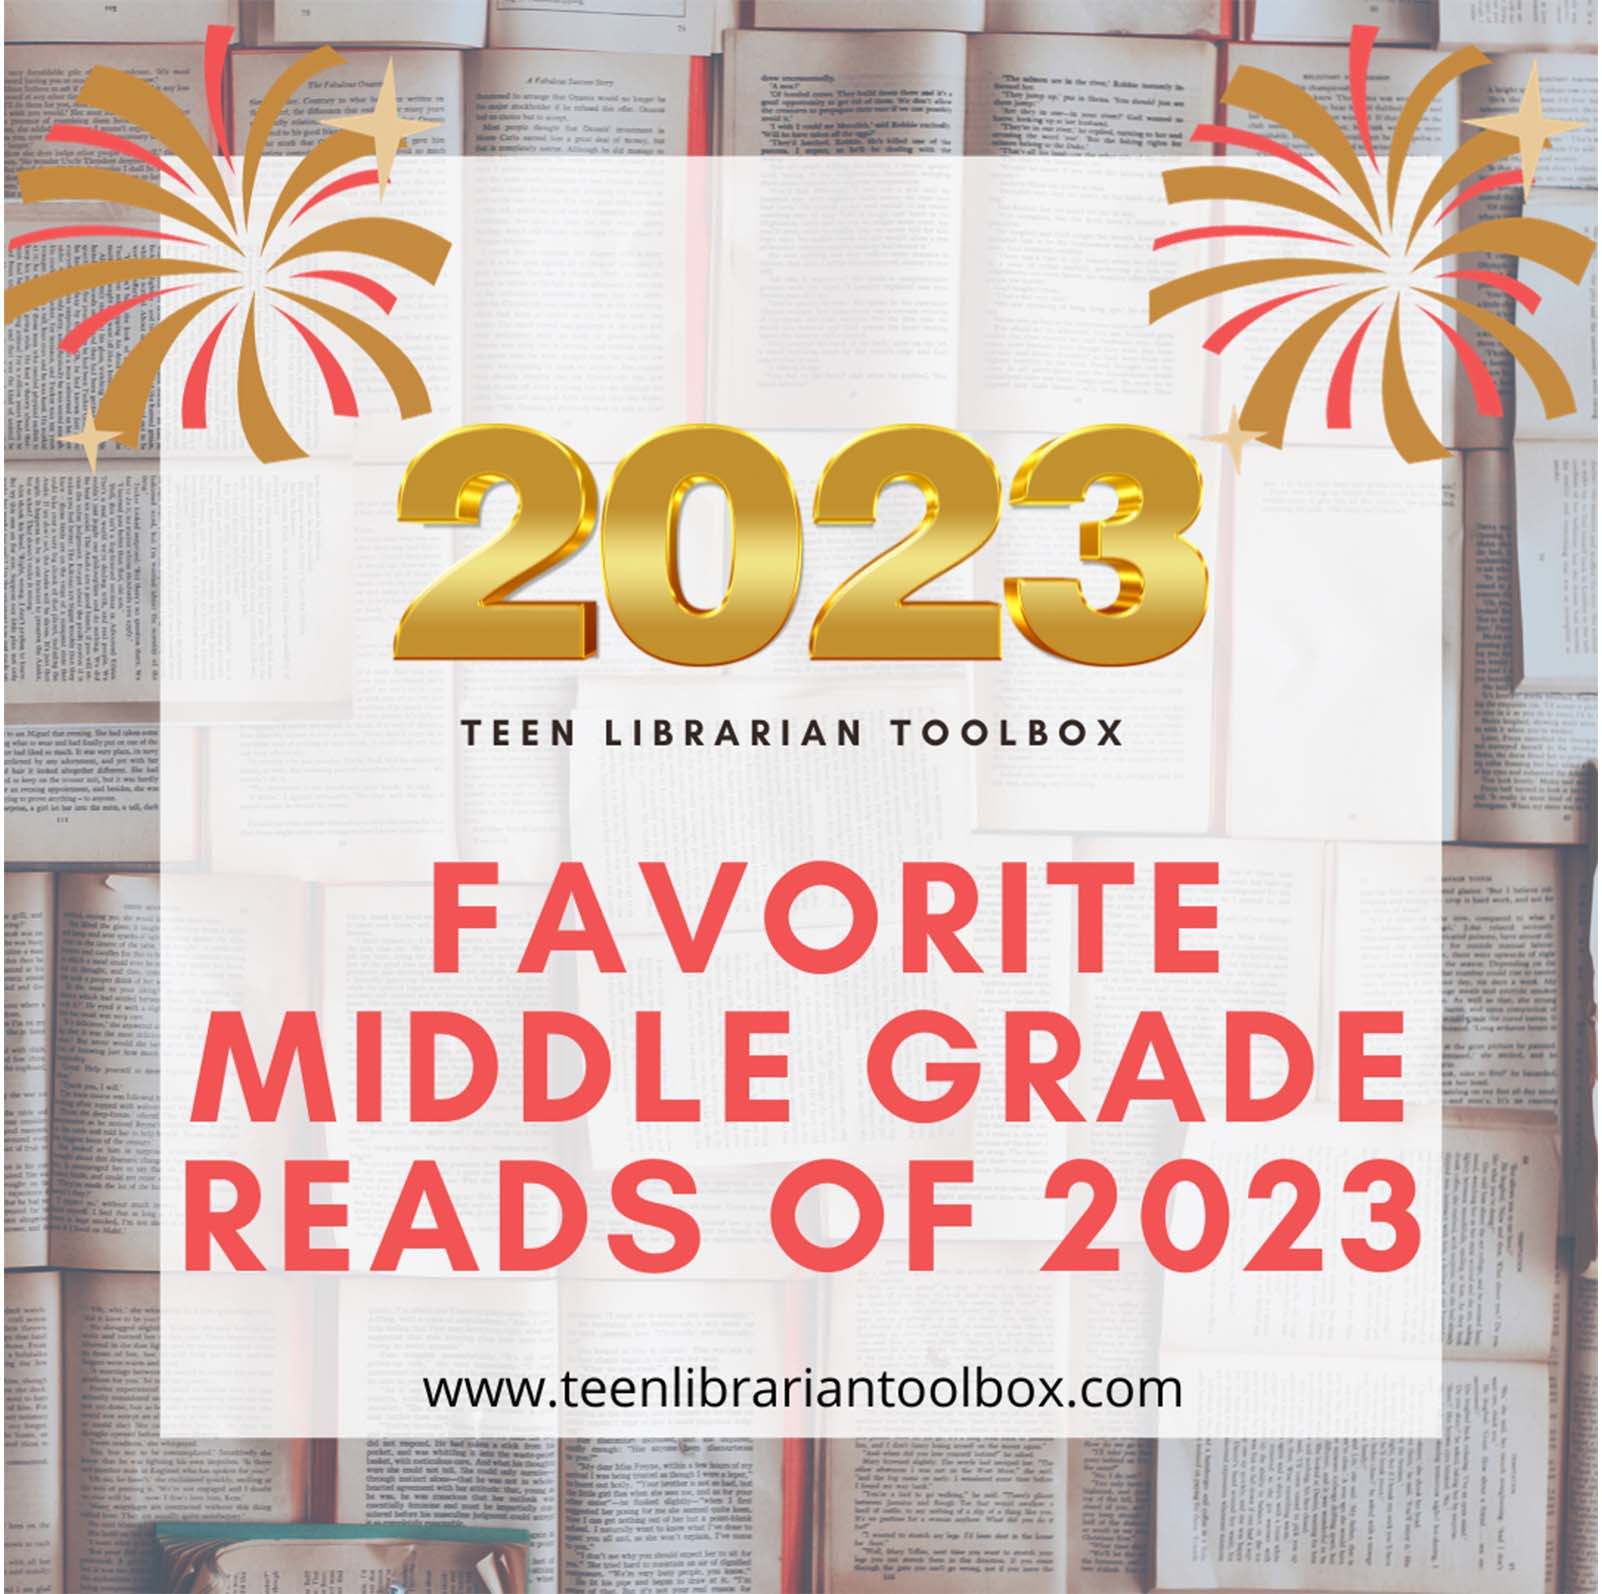 Favorite Middle Grade Reads of 2023